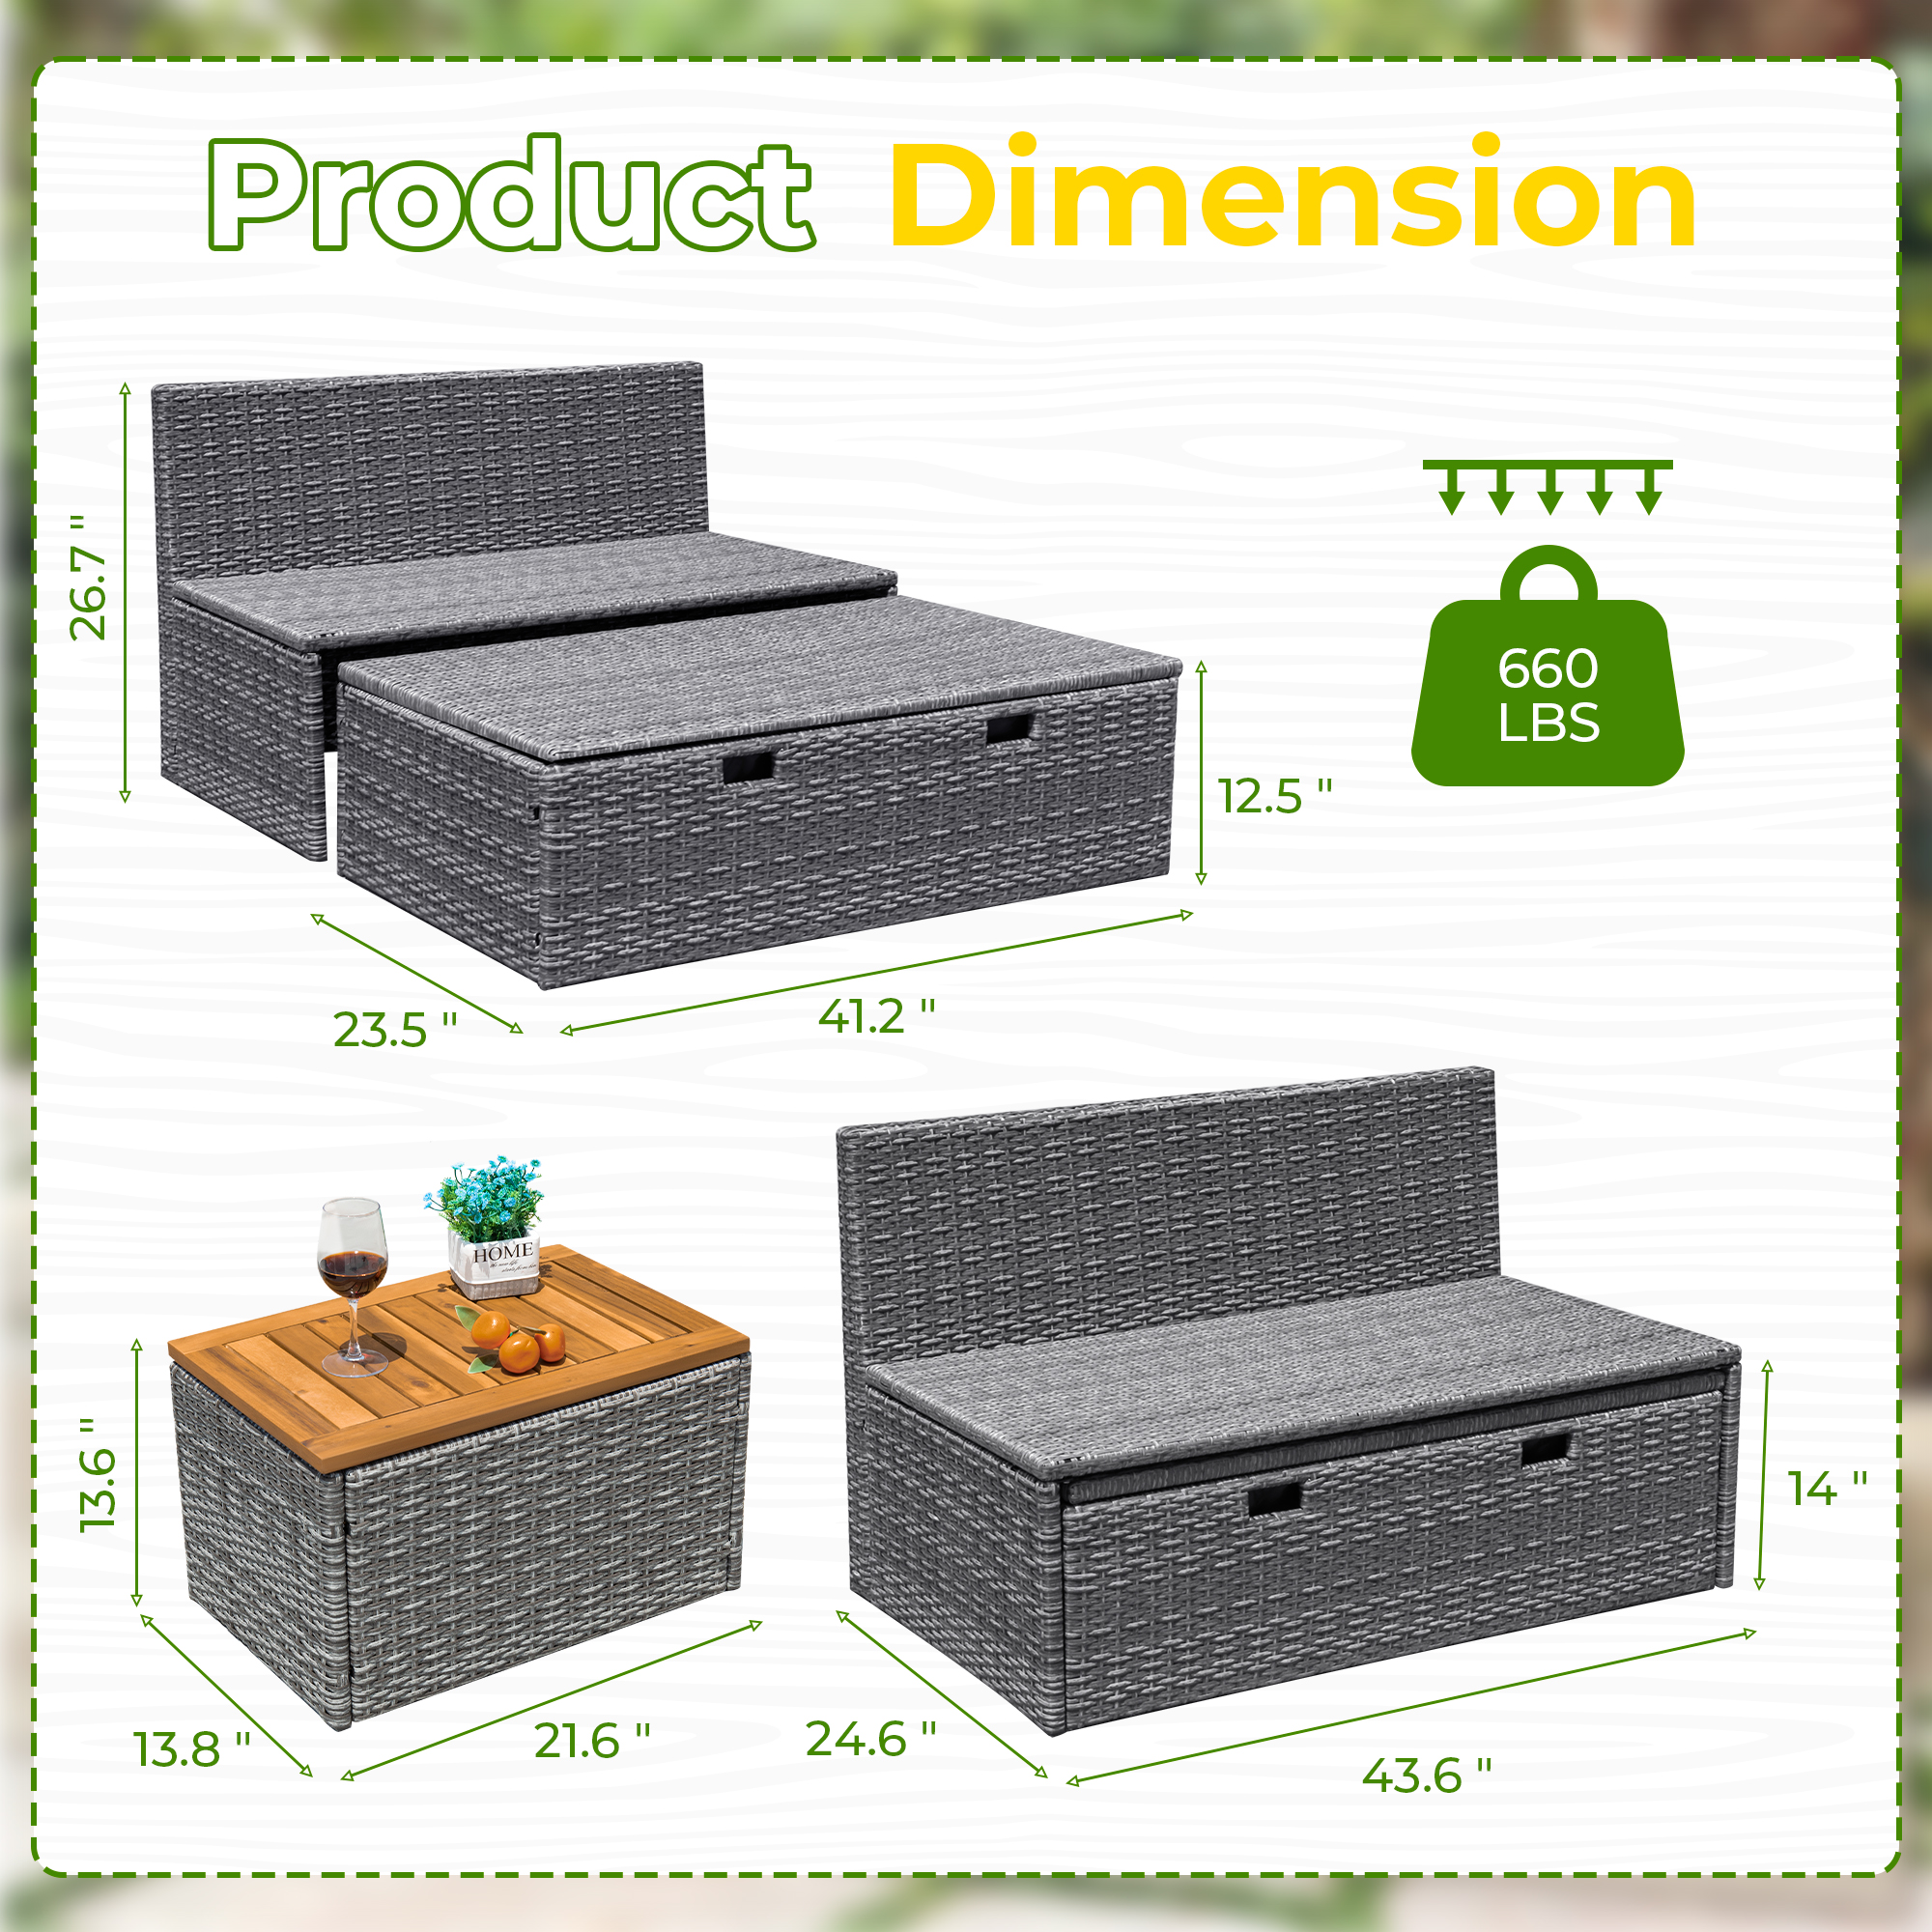 Homall Outdoor Daybed Patio Furniture Set Rattan Storage Daybed with Cushion and Side Table, Gray - image 5 of 8